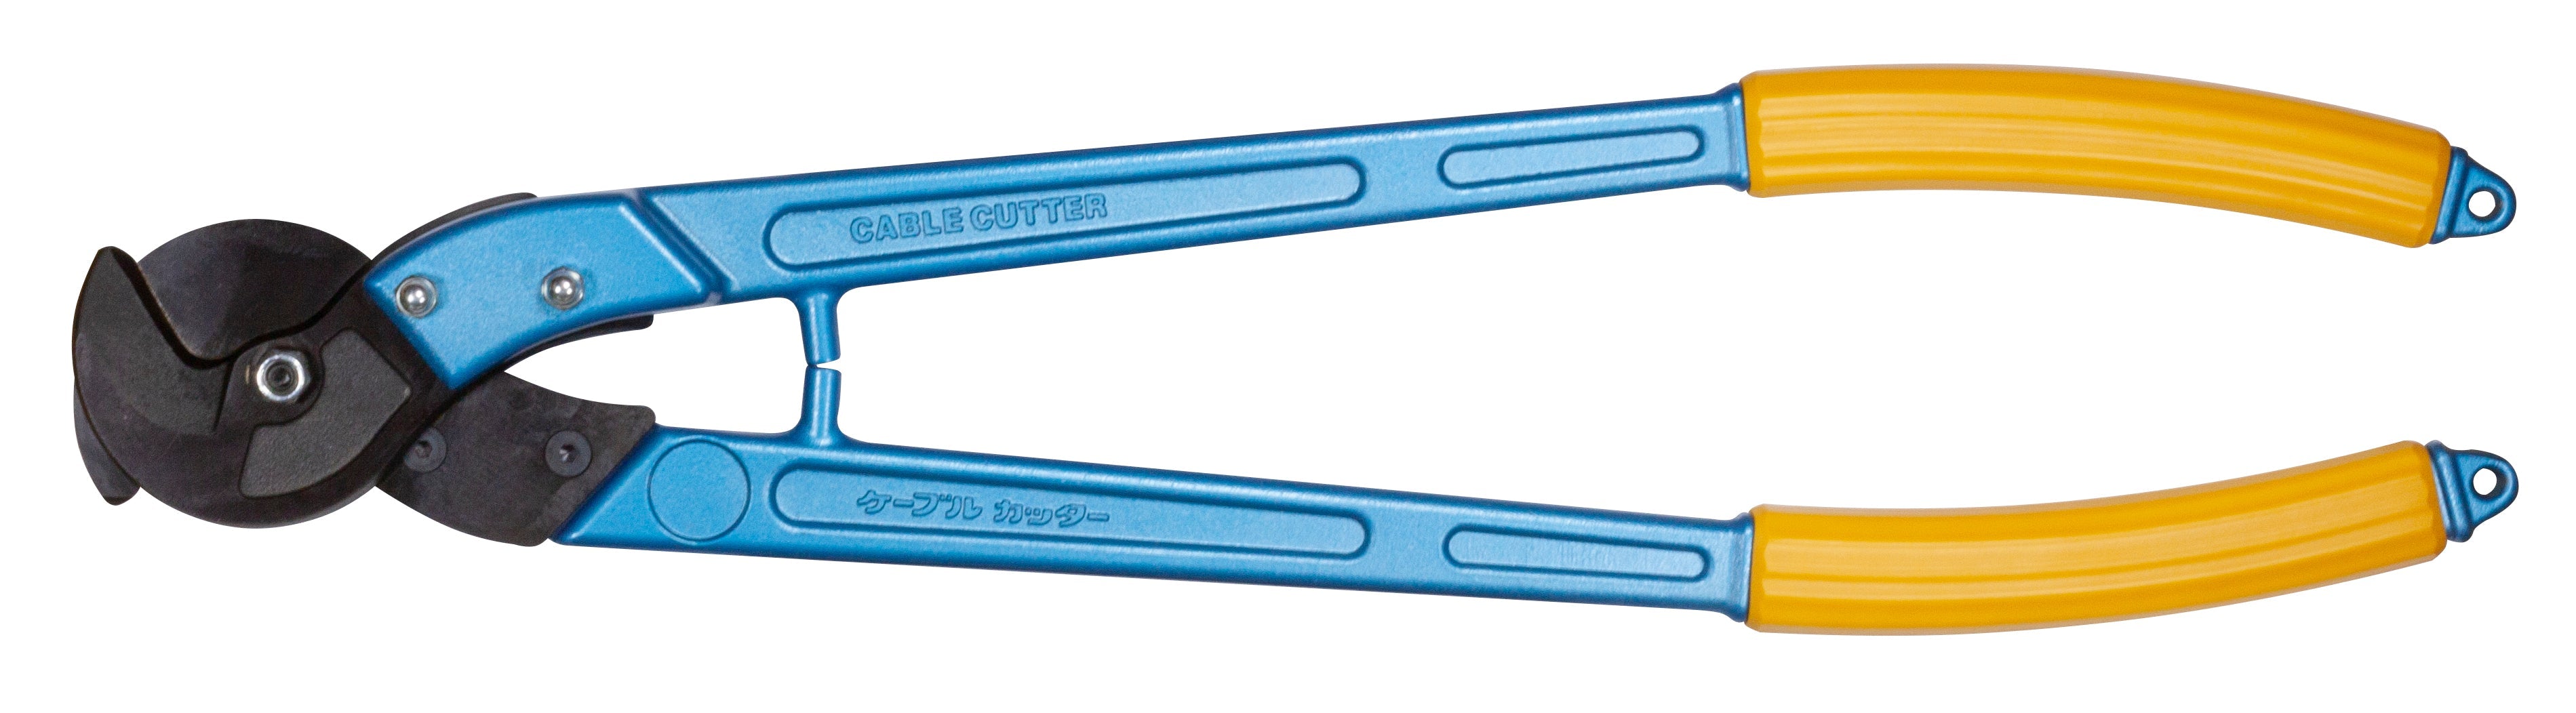 Cable Cutter Range: 250mm² - Per Pack